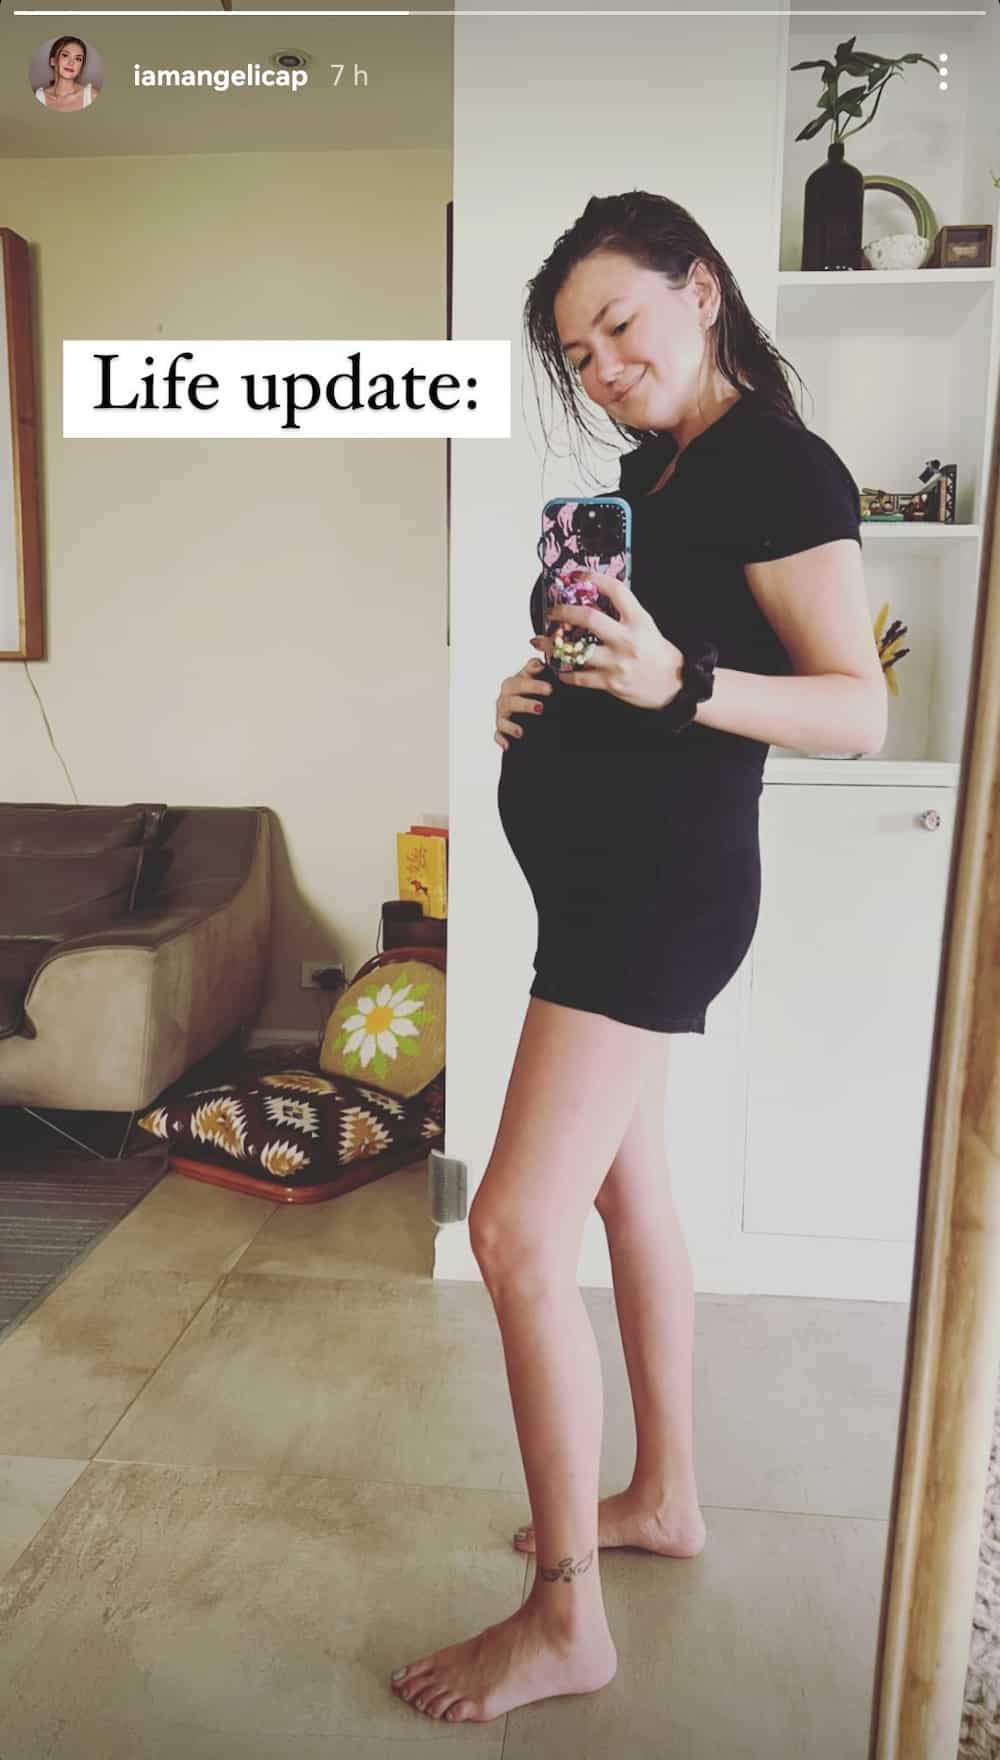 Angelica Panganiban posts "life update," shows off her baby bump